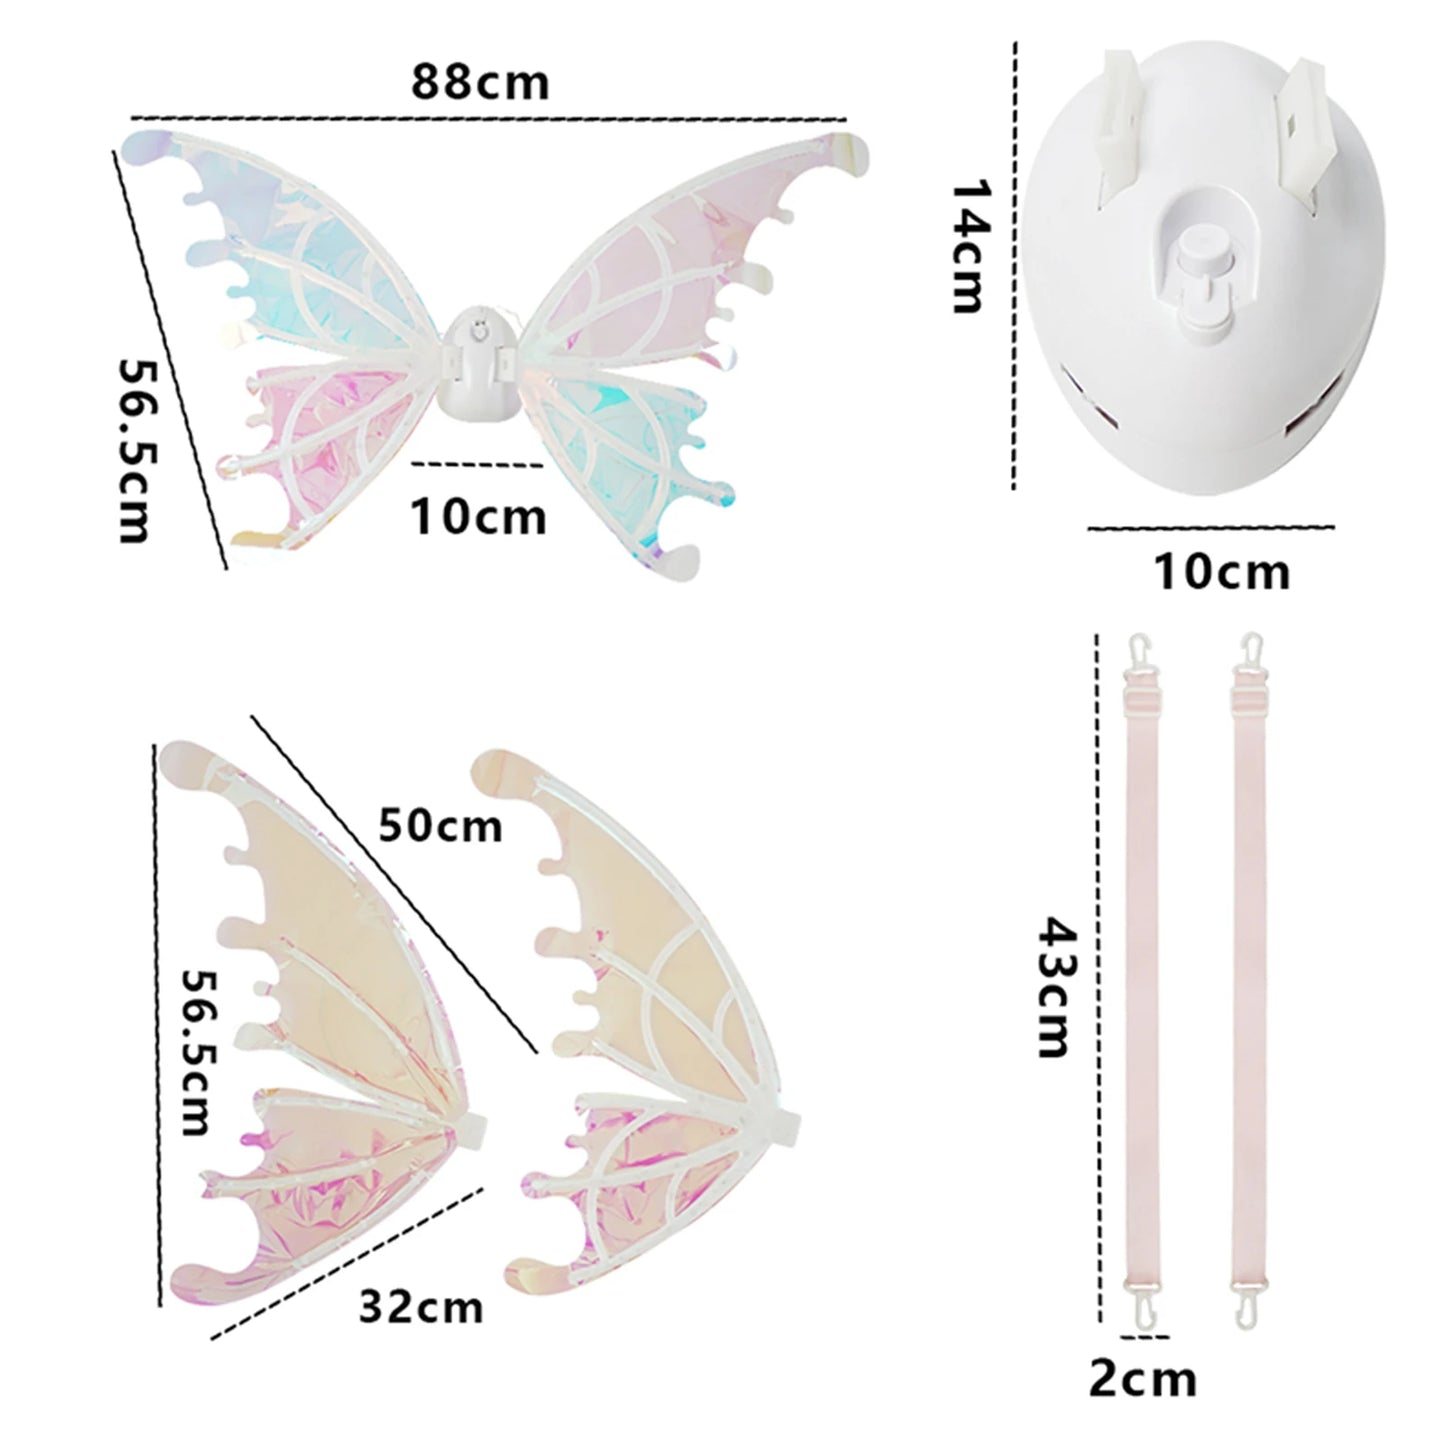 Electric Light Up LED Dog Butterfly Fairy Wings